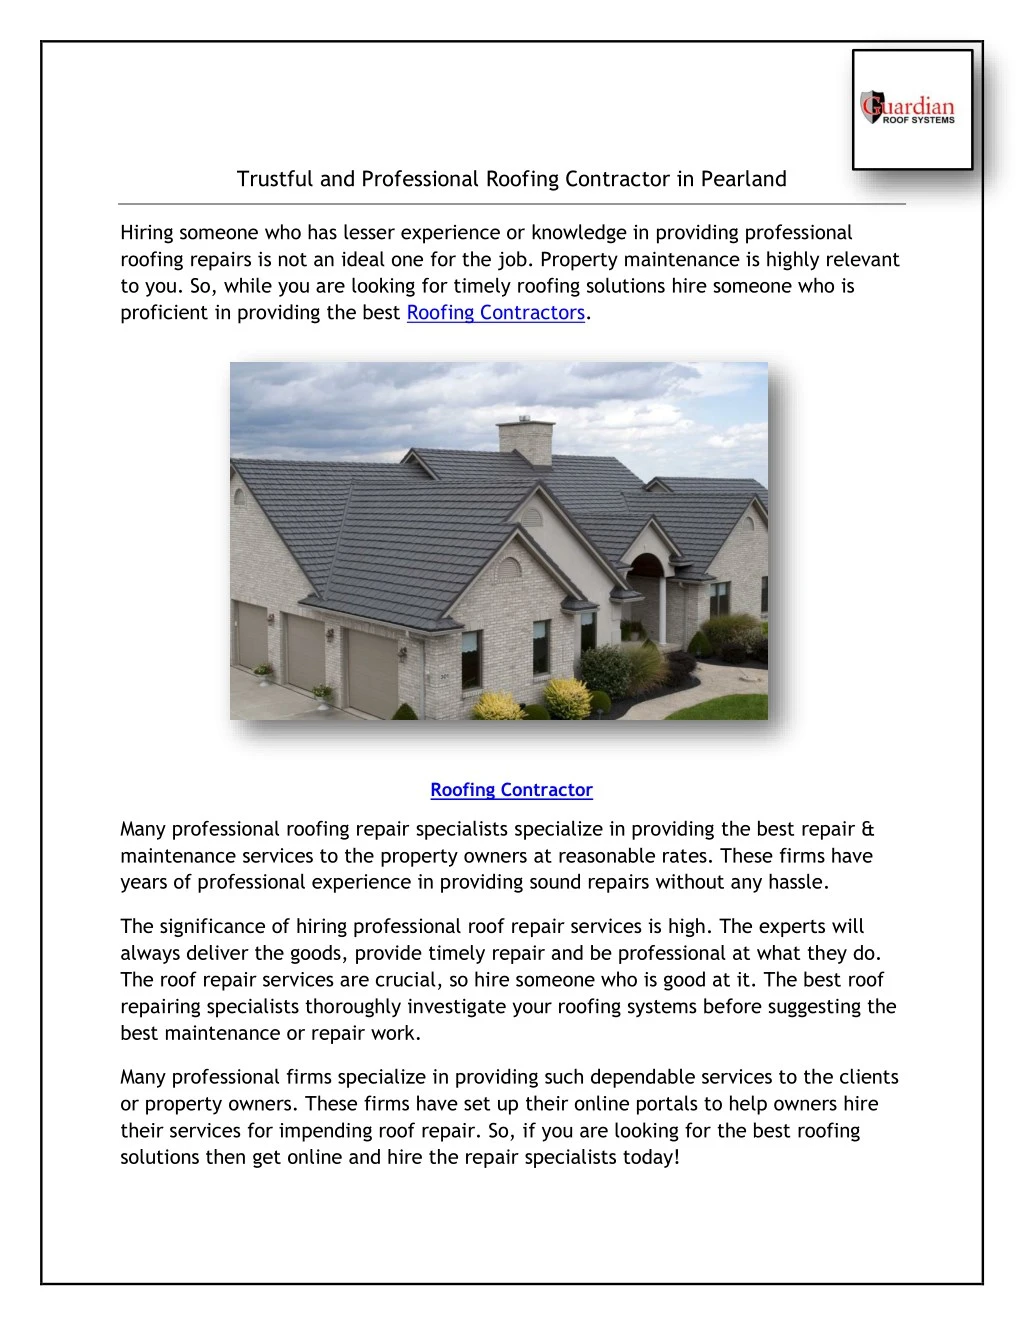 trustful and professional roofing contractor